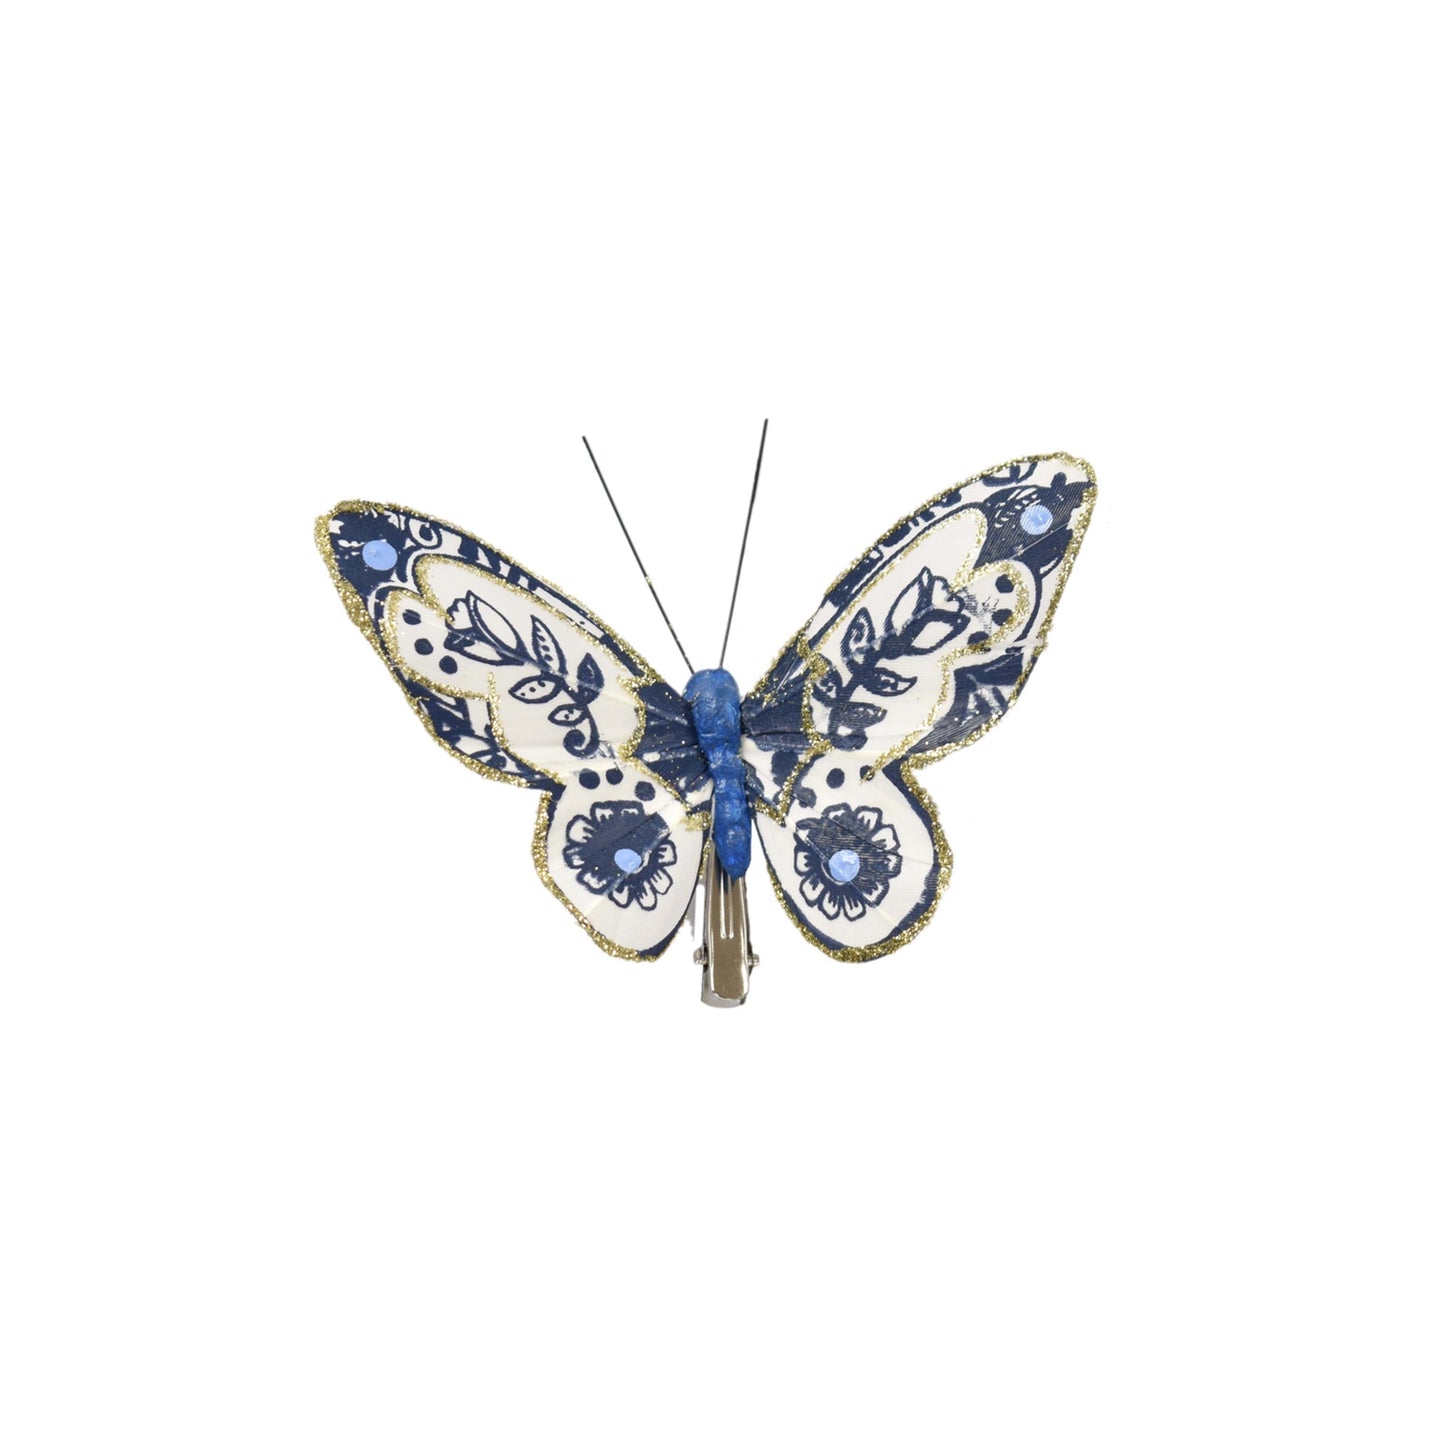 Exquisitely Glittered Edge Butterfly Ornament 3 Asst 2.75" x 4" in Blue White Gold | BFC22